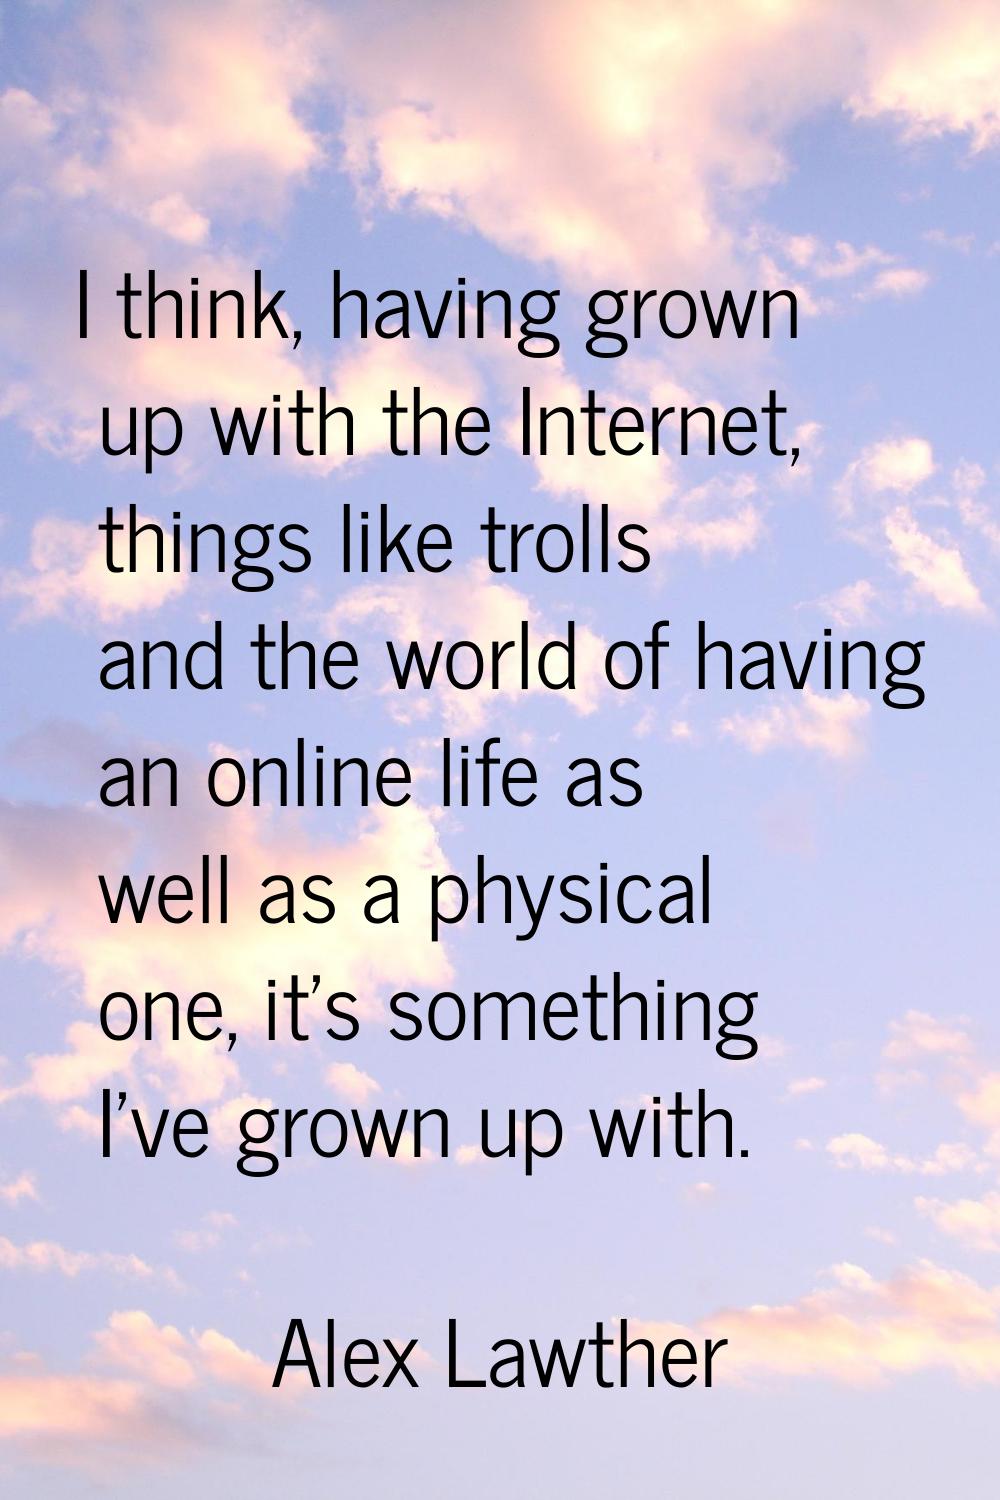 I think, having grown up with the Internet, things like trolls and the world of having an online li